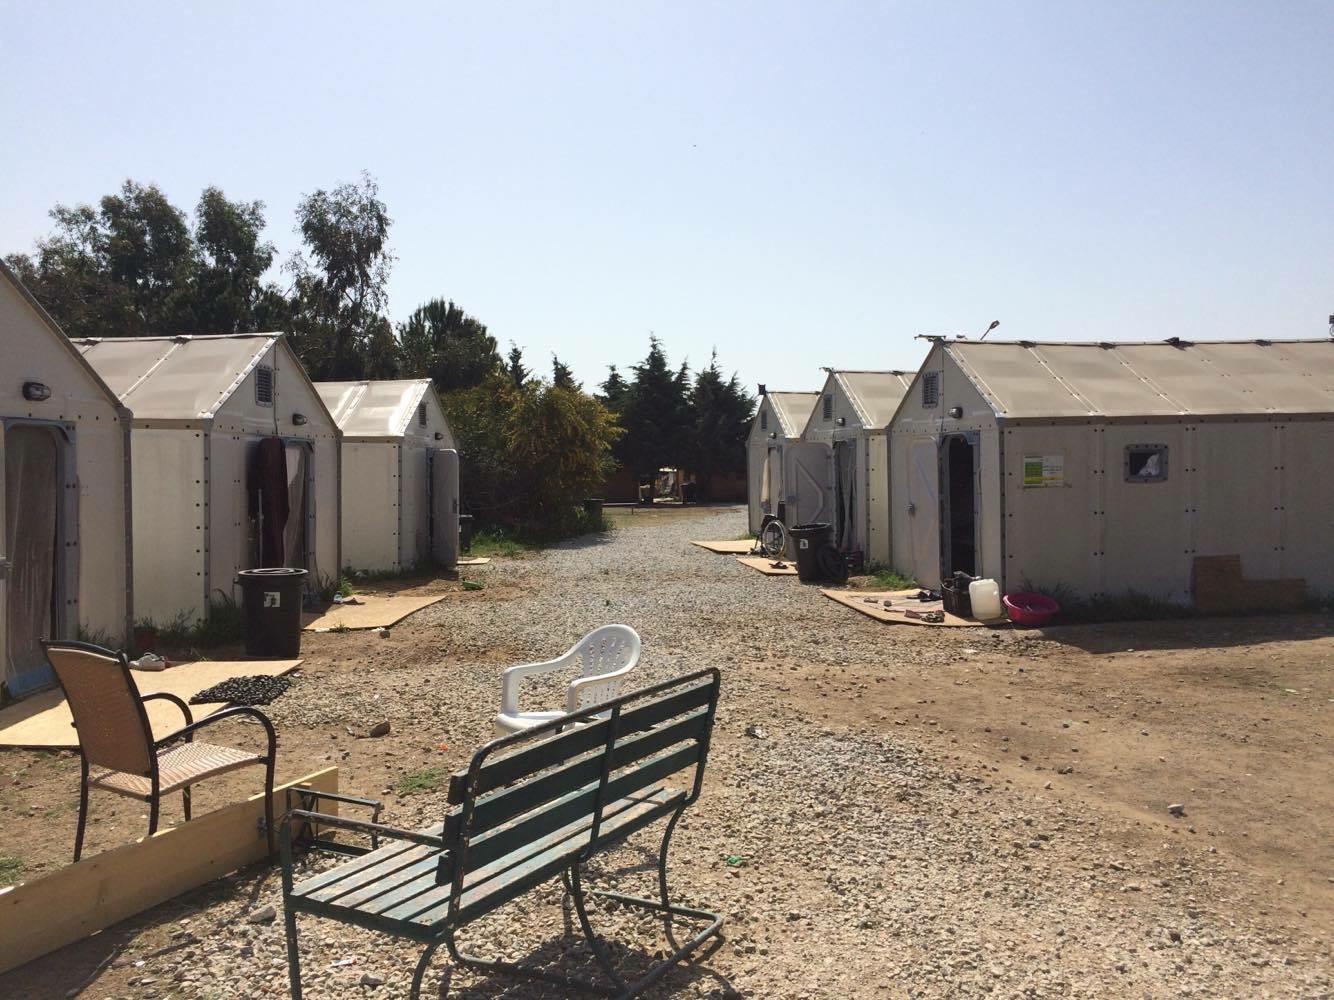 The refugee camp of PIKPA on Lesbos island, Greece. Since October 2015 around 2,000 people including people with disabilities, single women, children, and survivors of shipwrecks, have found shelter at PIKPA.